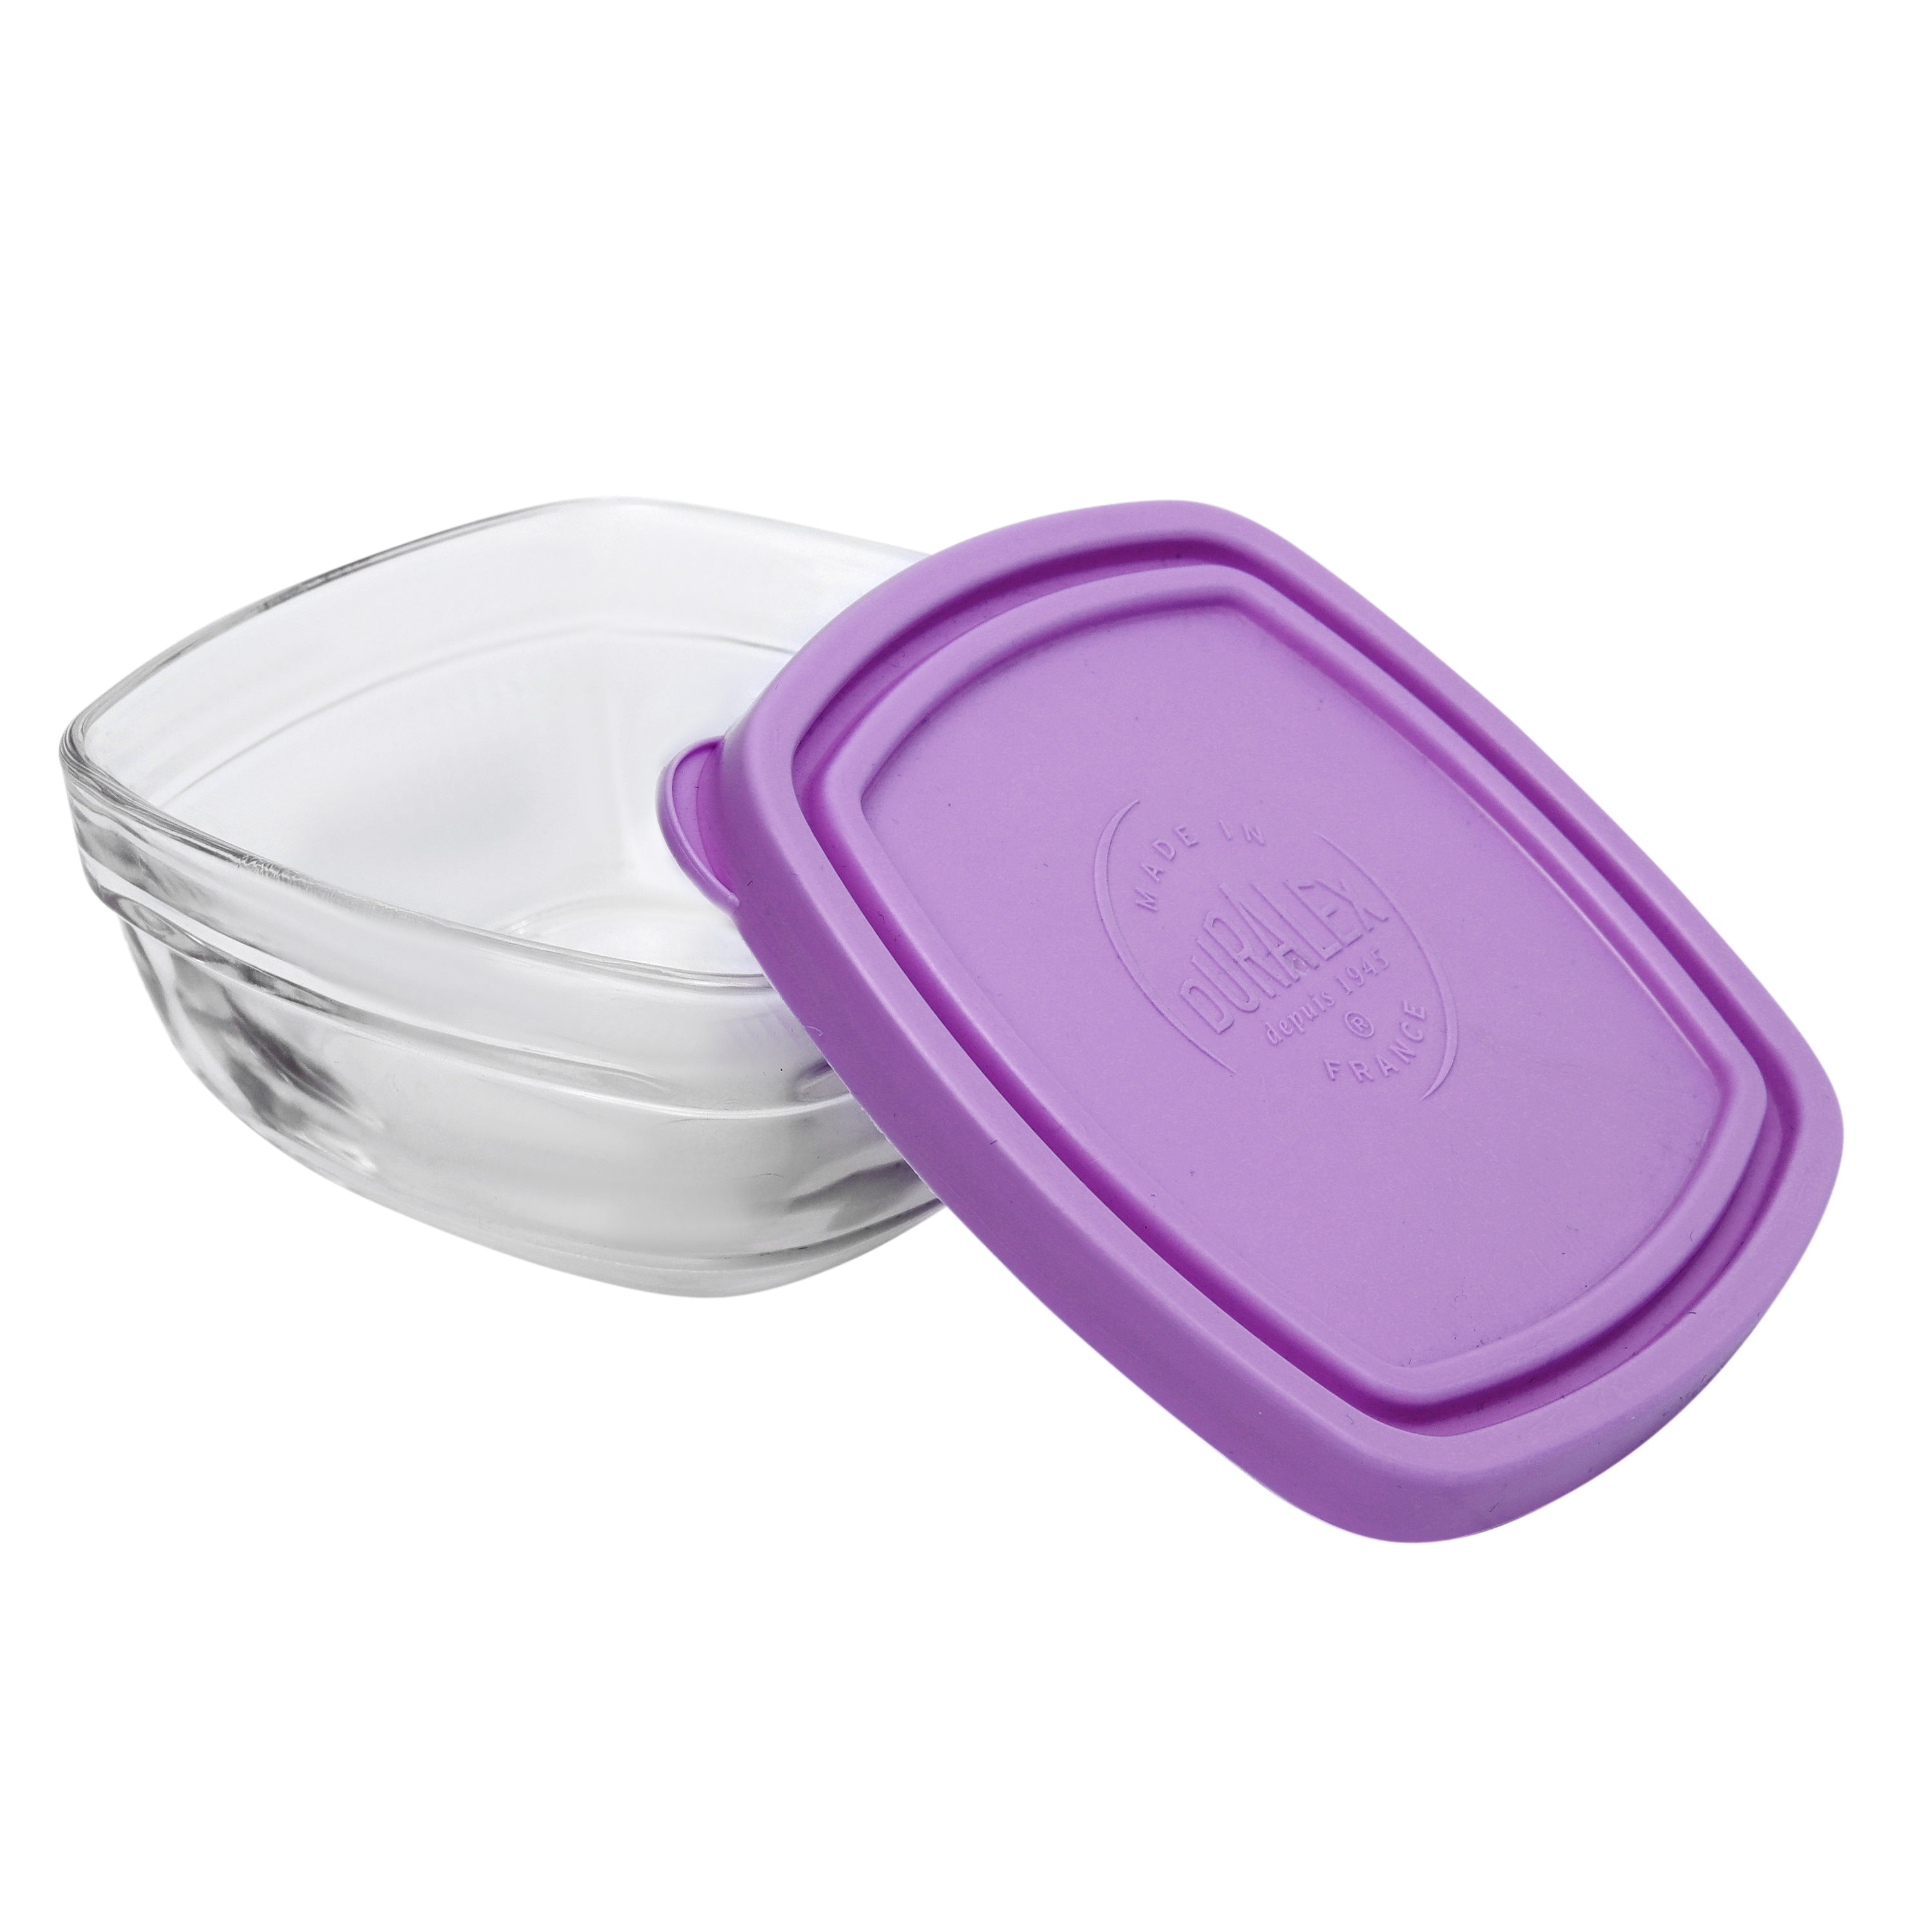 Freshbox Square Bowl with Lid, Duralex USA